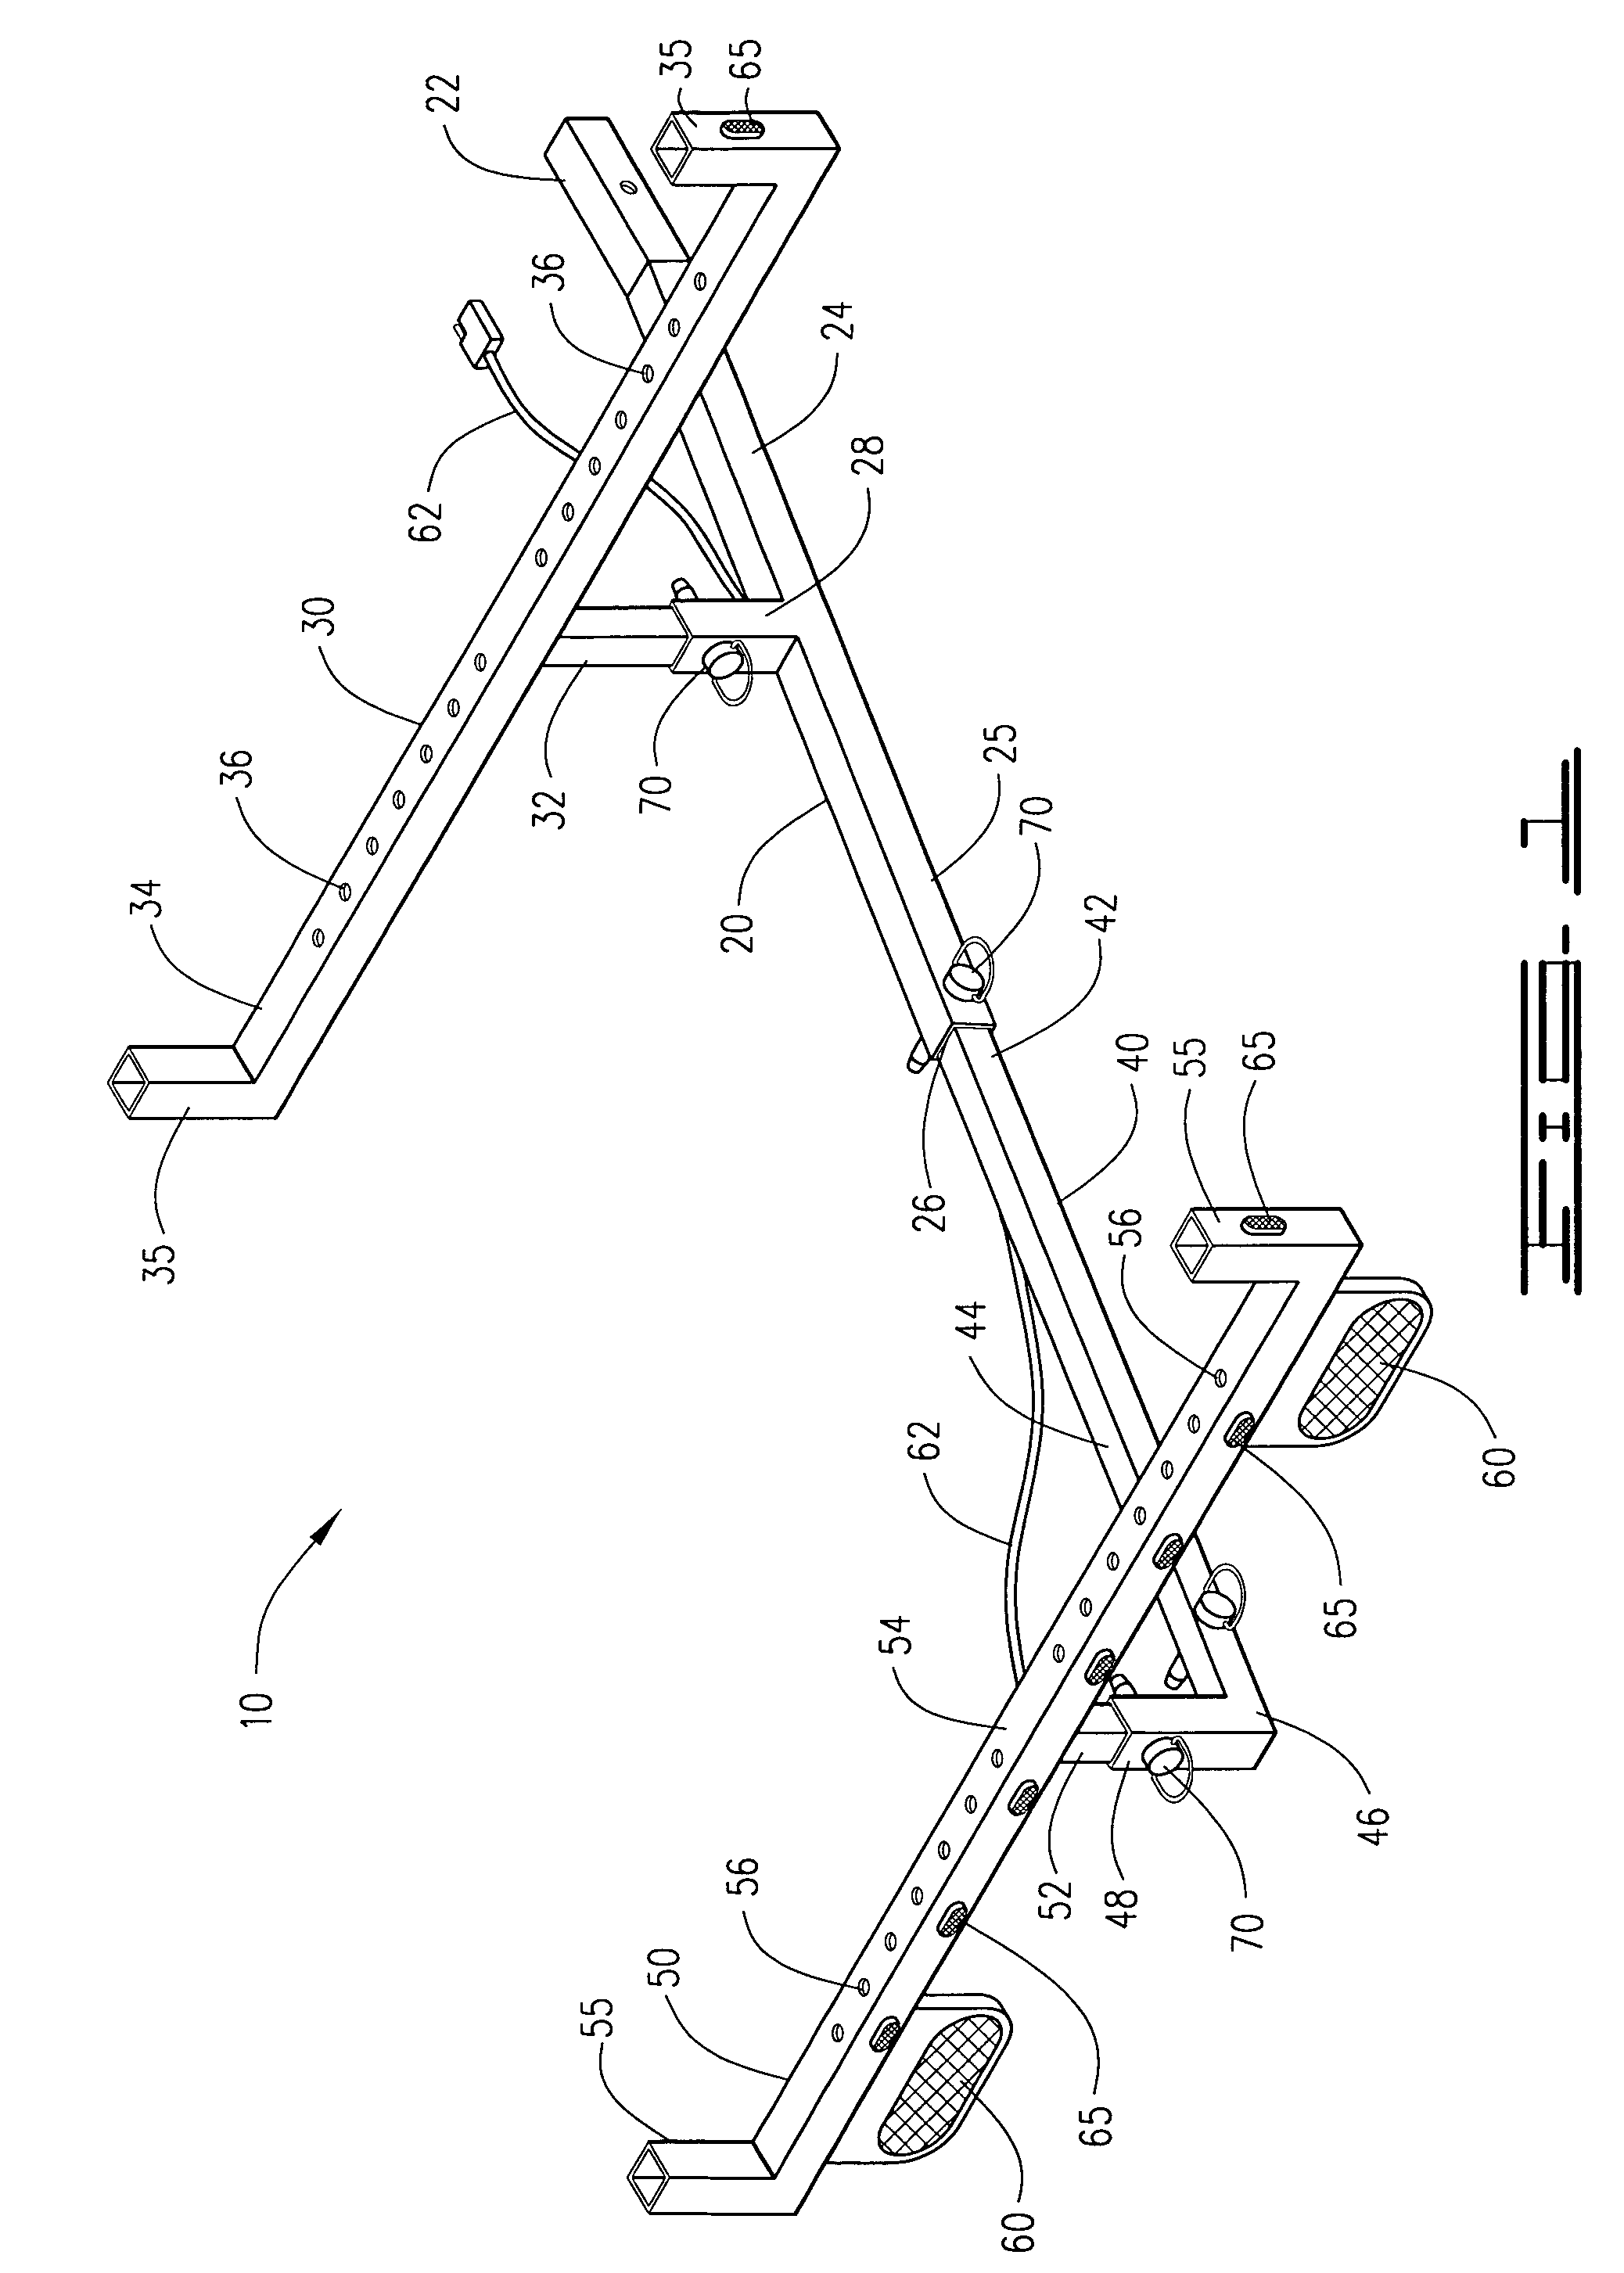 Vehicle cargo bed extension device